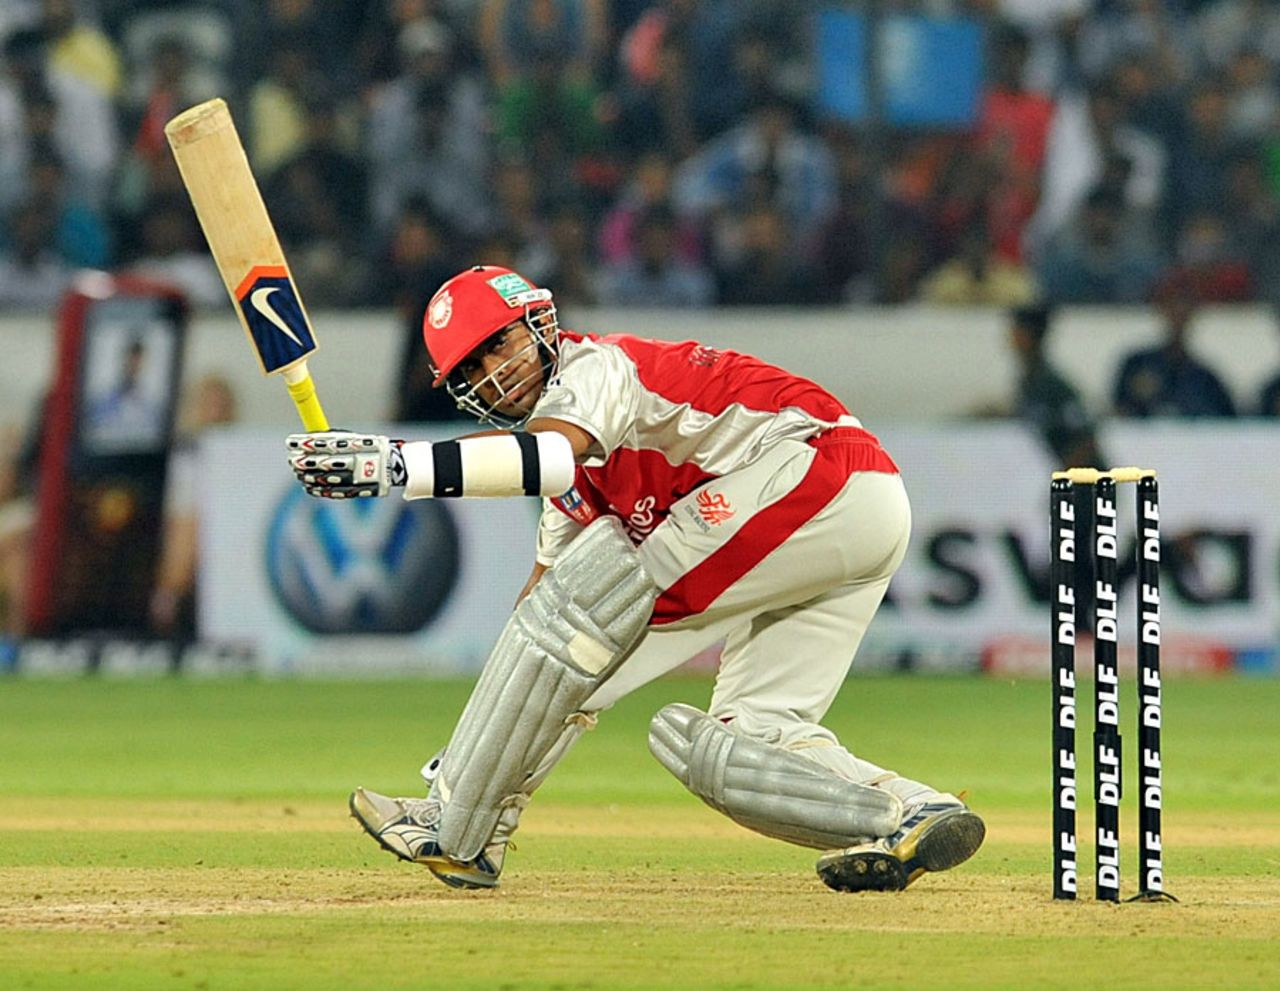 Paul Valthaty improvises on his way to a 35-ball fifty, Deccan Chargers v Kings XI Punjab, April 16, 2011